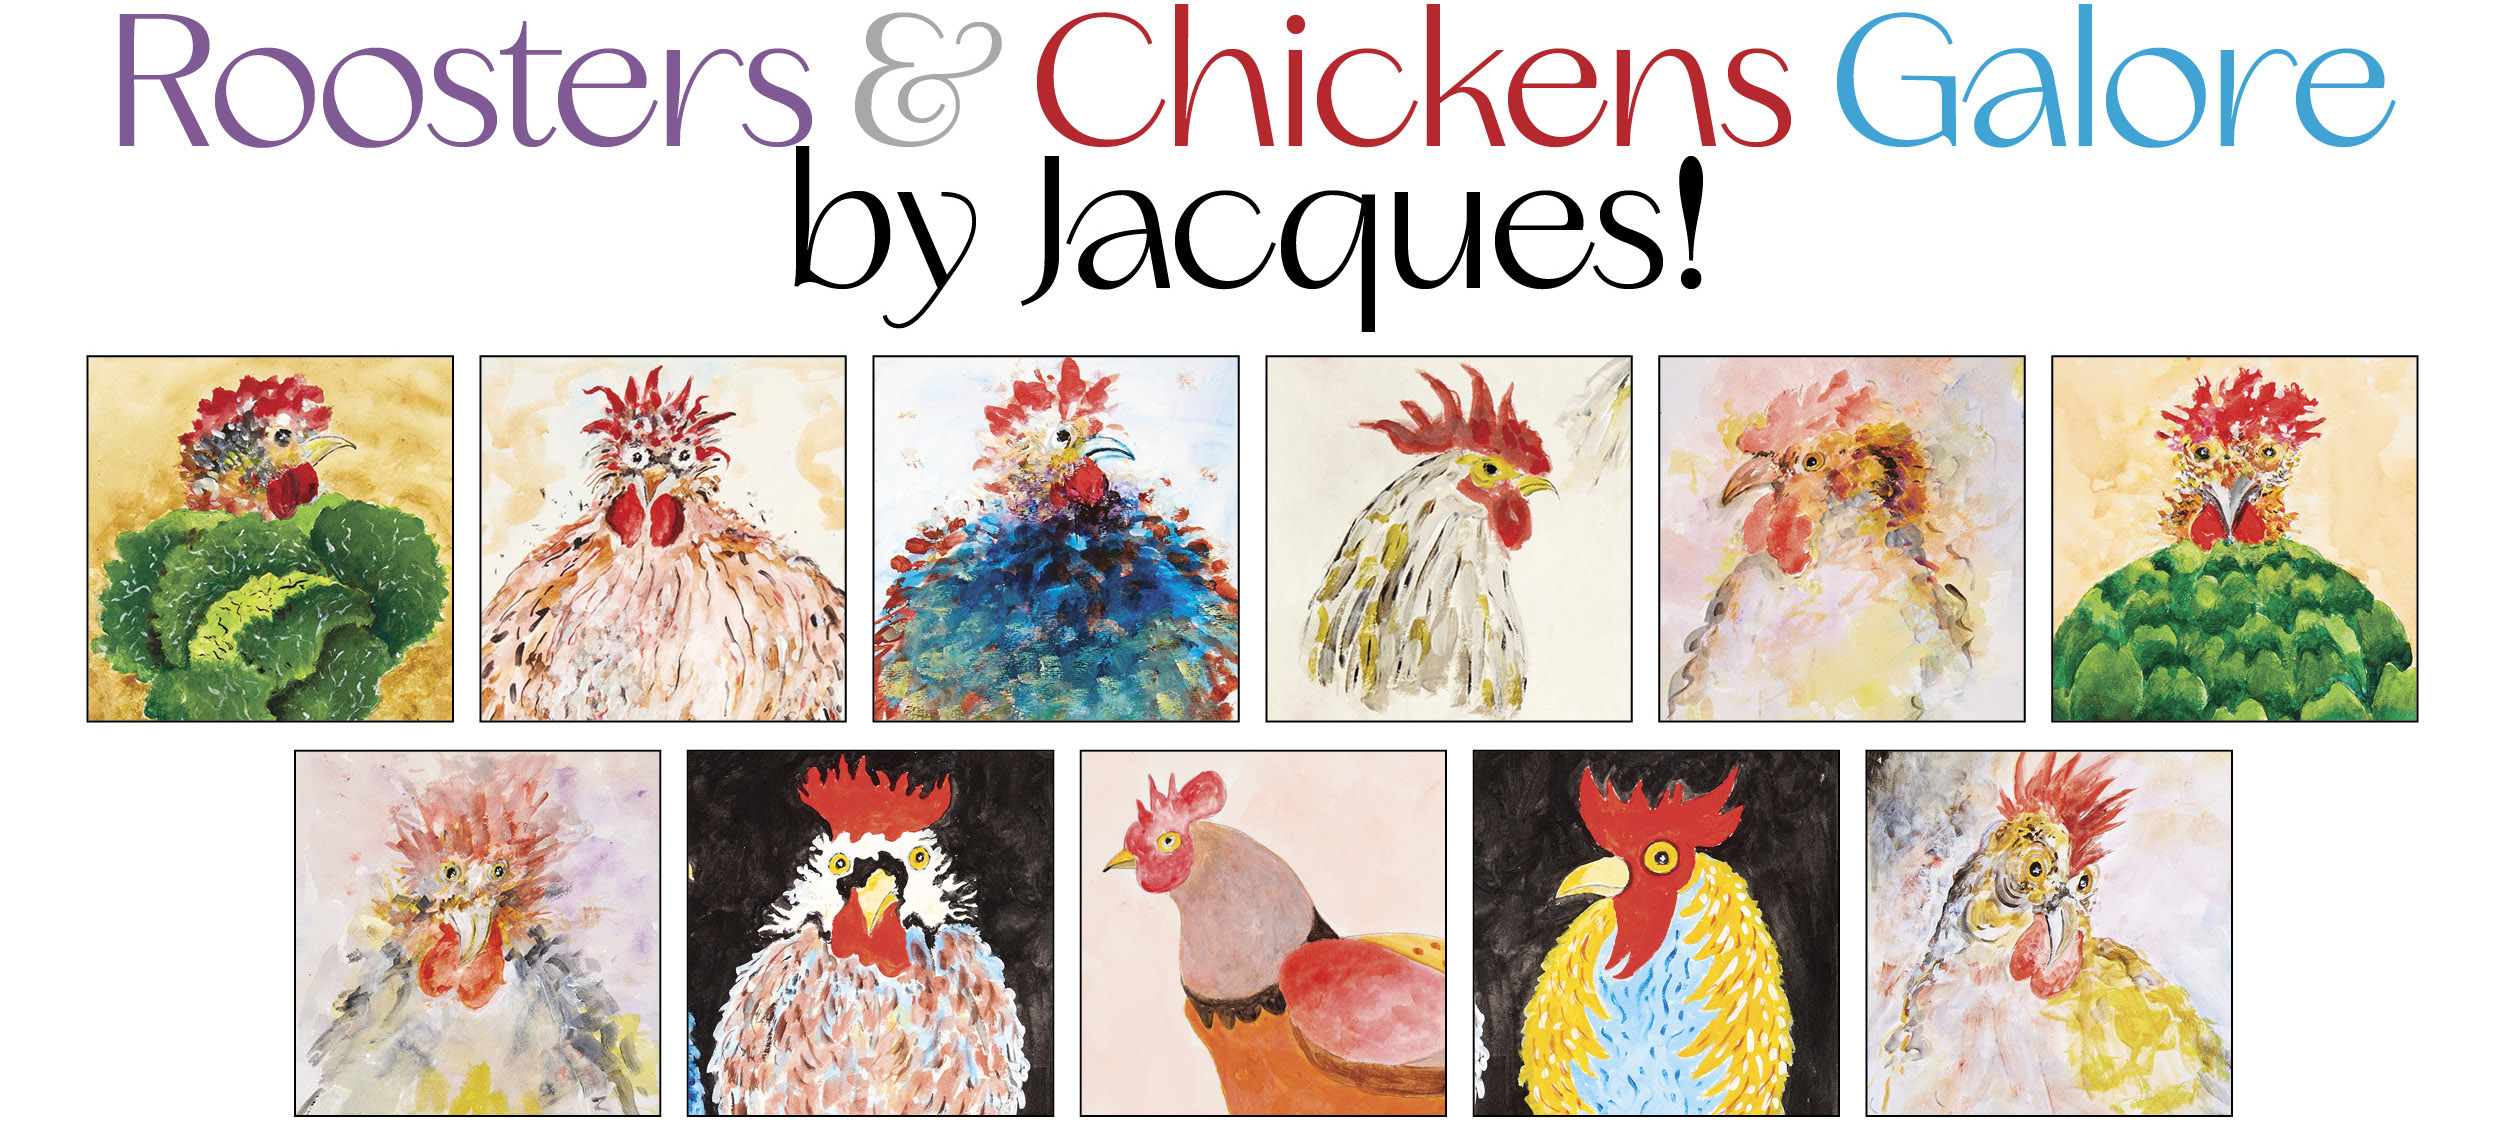 Two of Jacques Pépin’s favorite subjects for his original paintings are chickens and roosters. Enjoy!